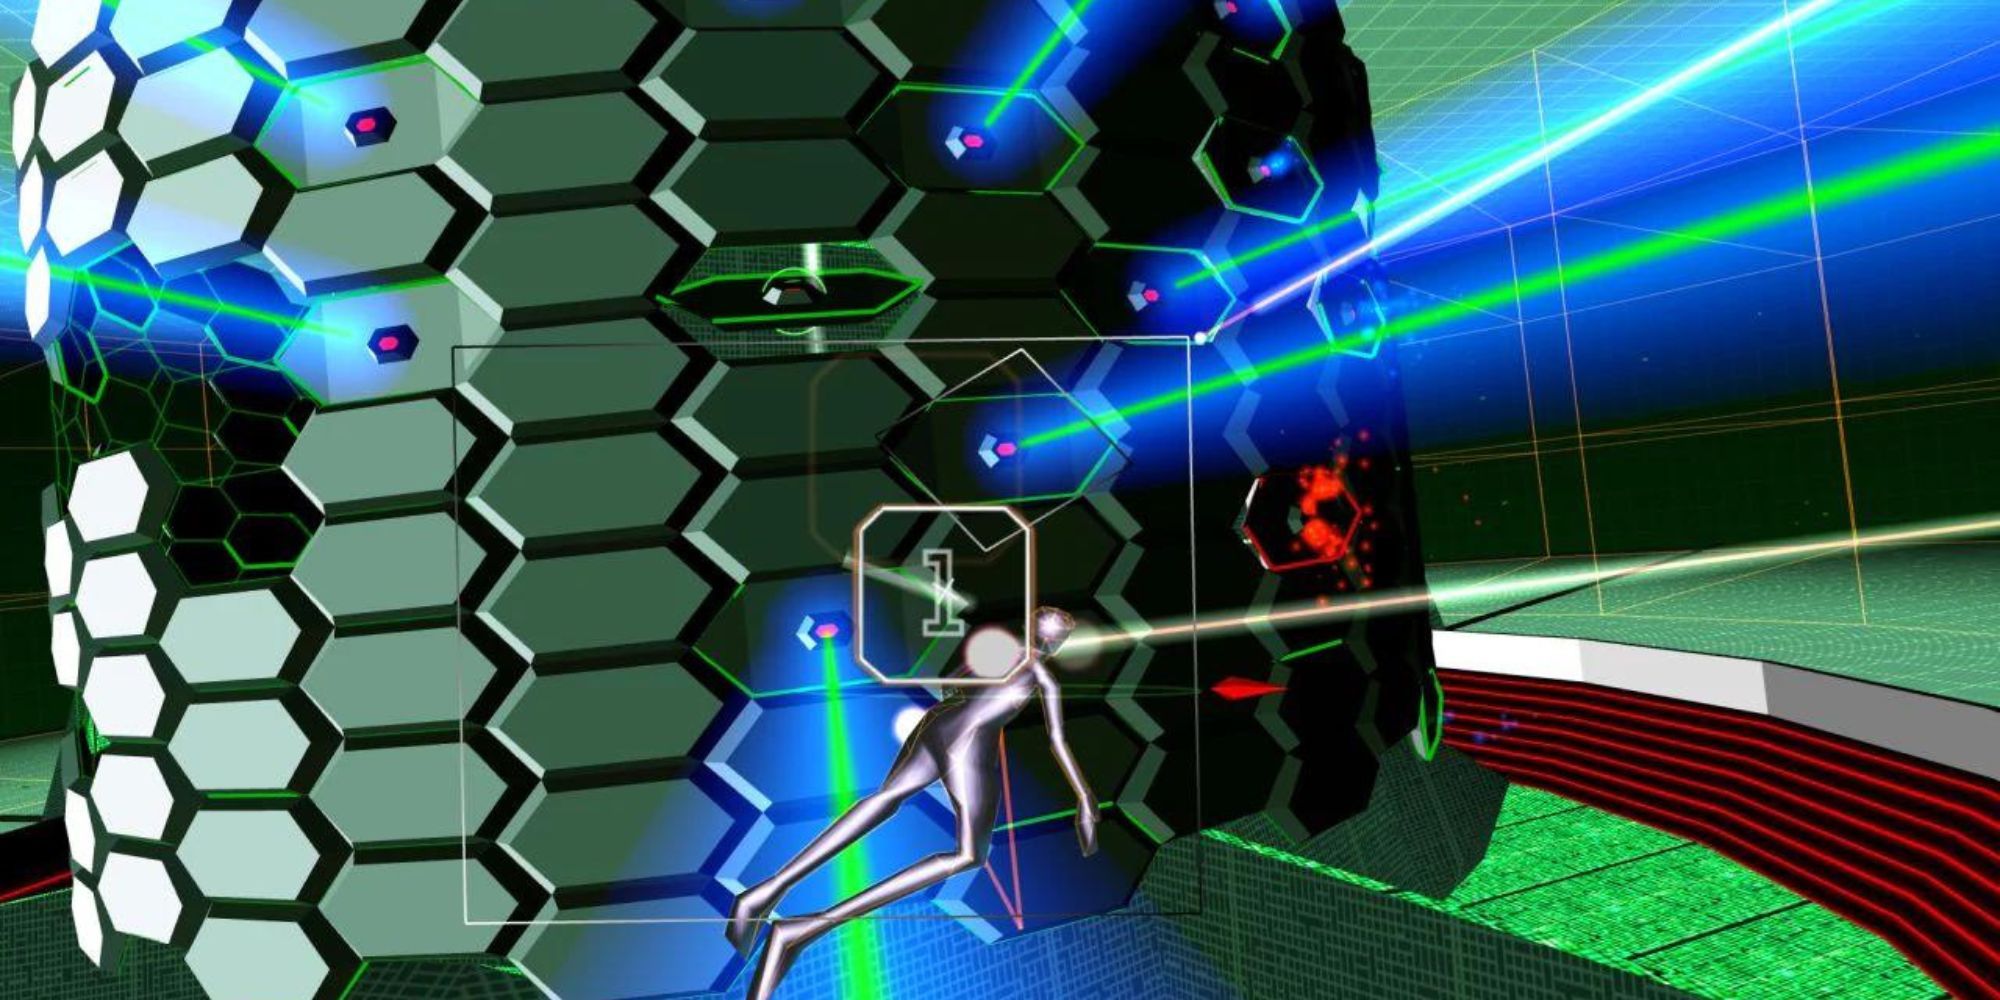 The main character glides past a machine shooting lasers